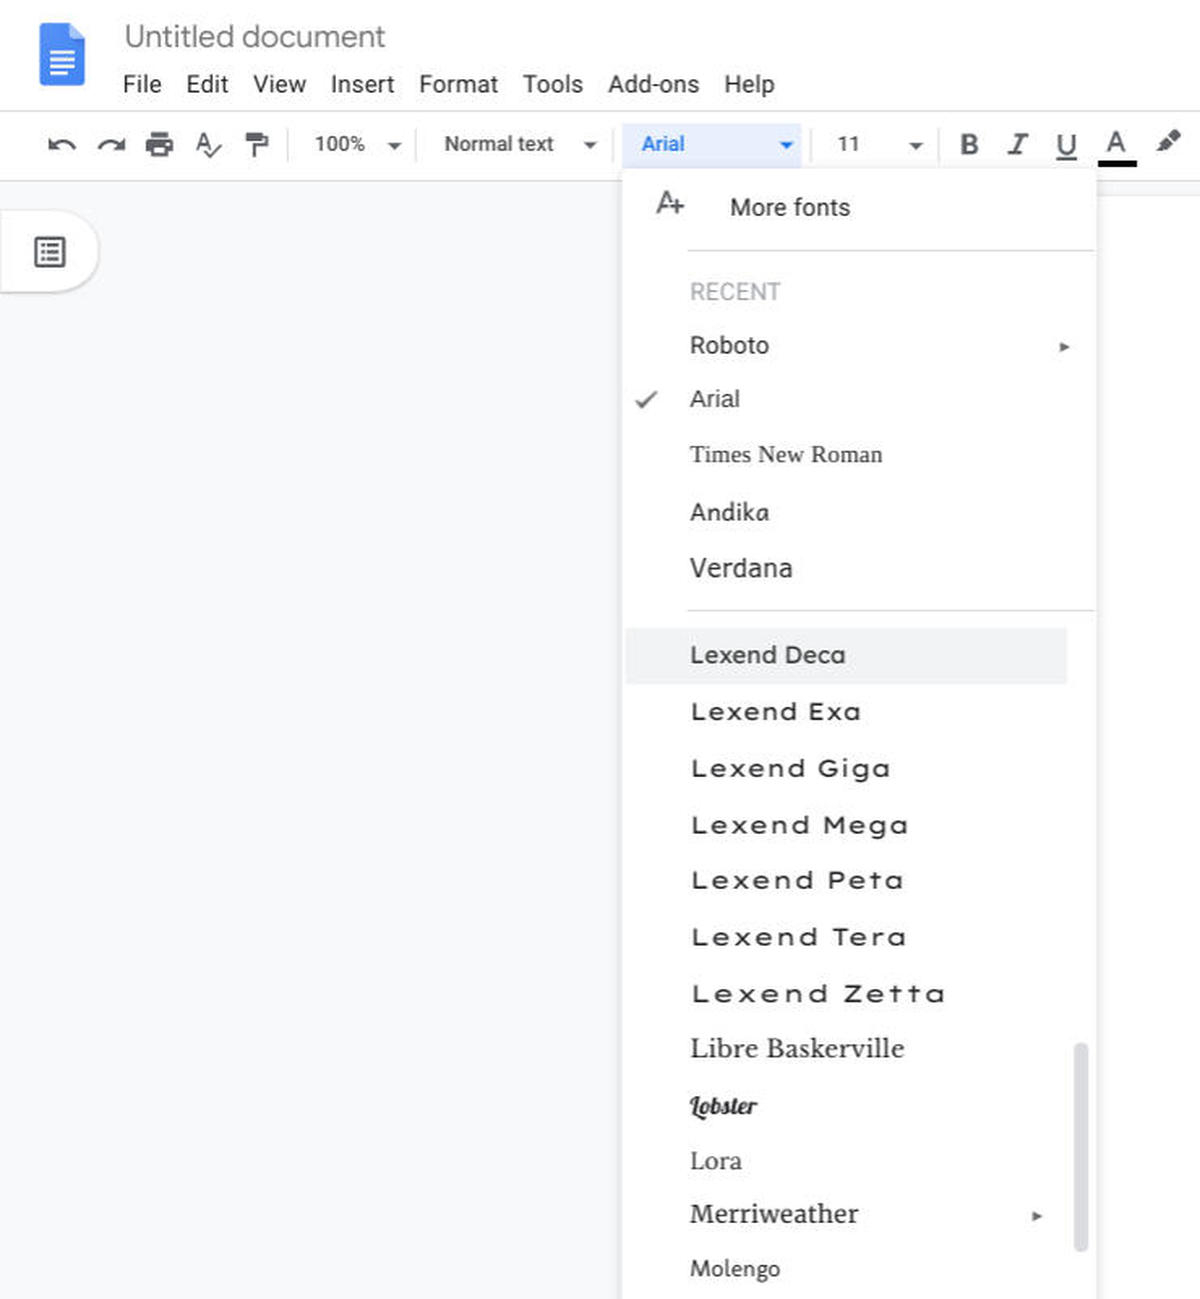 How To Use The Lexend Font In G Suite - Techrepublic